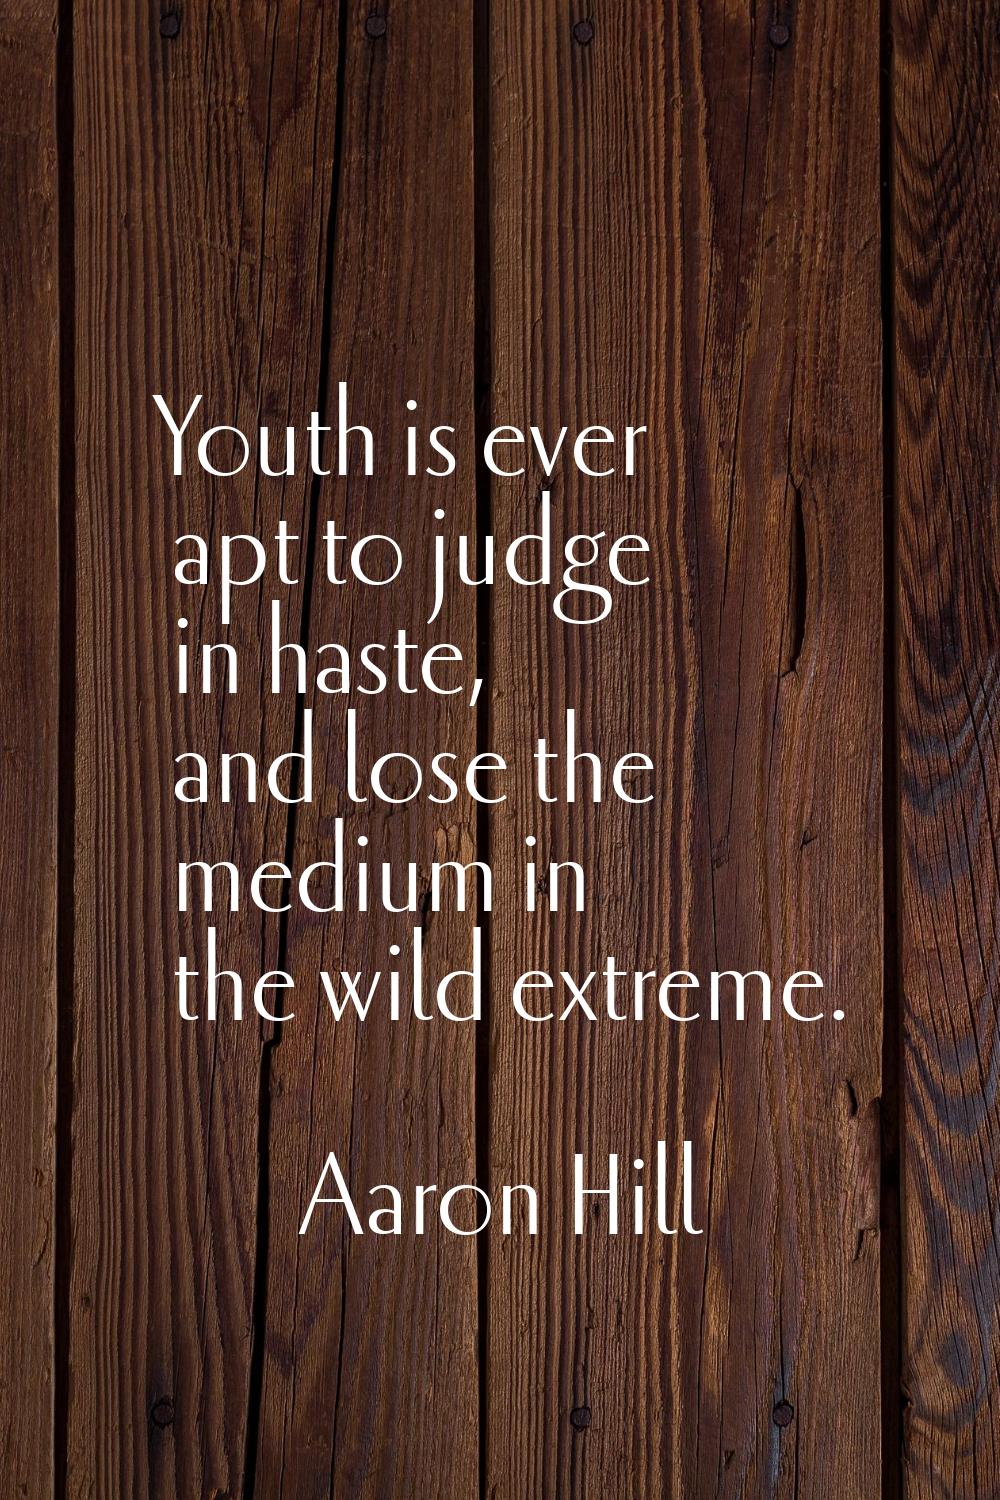 Youth is ever apt to judge in haste, and lose the medium in the wild extreme.